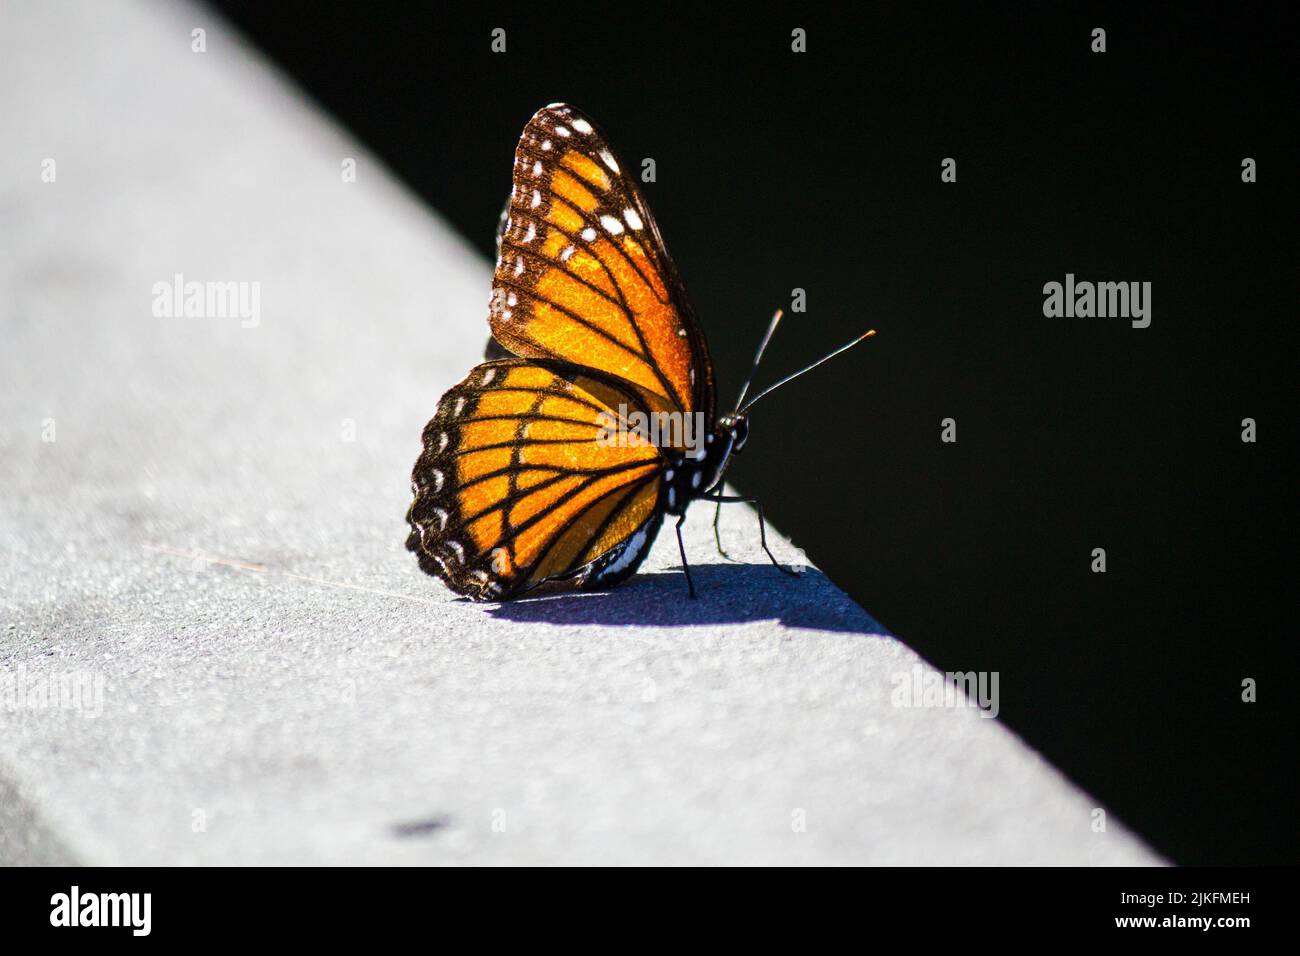 A closeup of a viceroy butterfly on a metal surface Stock Photo